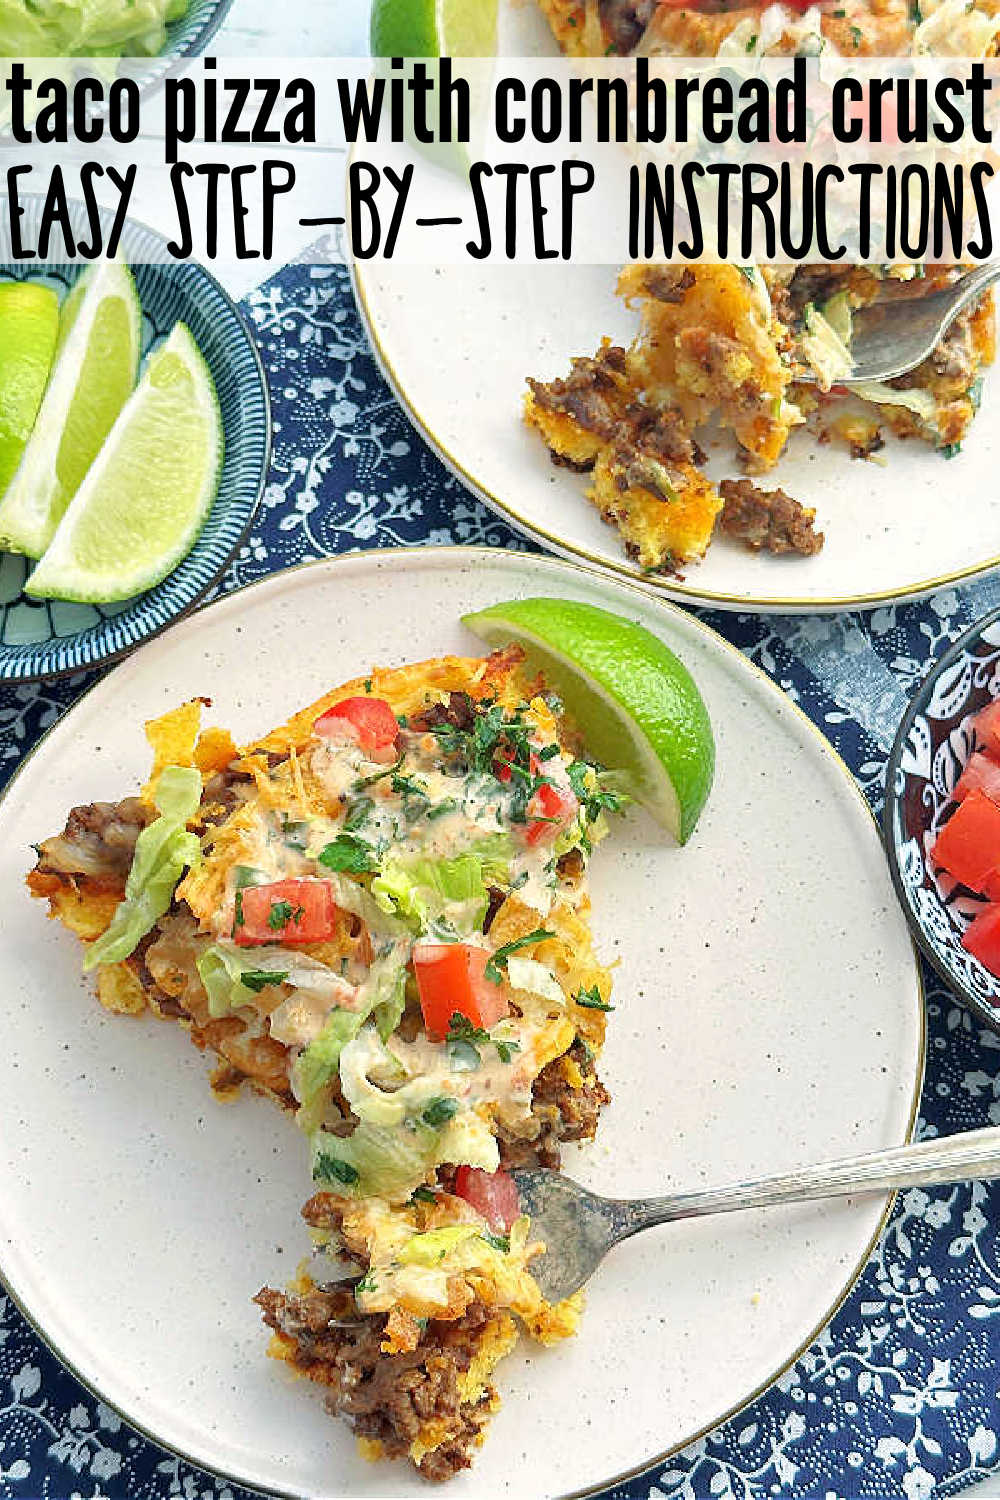 This skillet taco pizza recipe might just become a new favorite in your house! A tasty cornbread crust is topped with ground beef and your favorite taco toppings. via @foodtasticmom